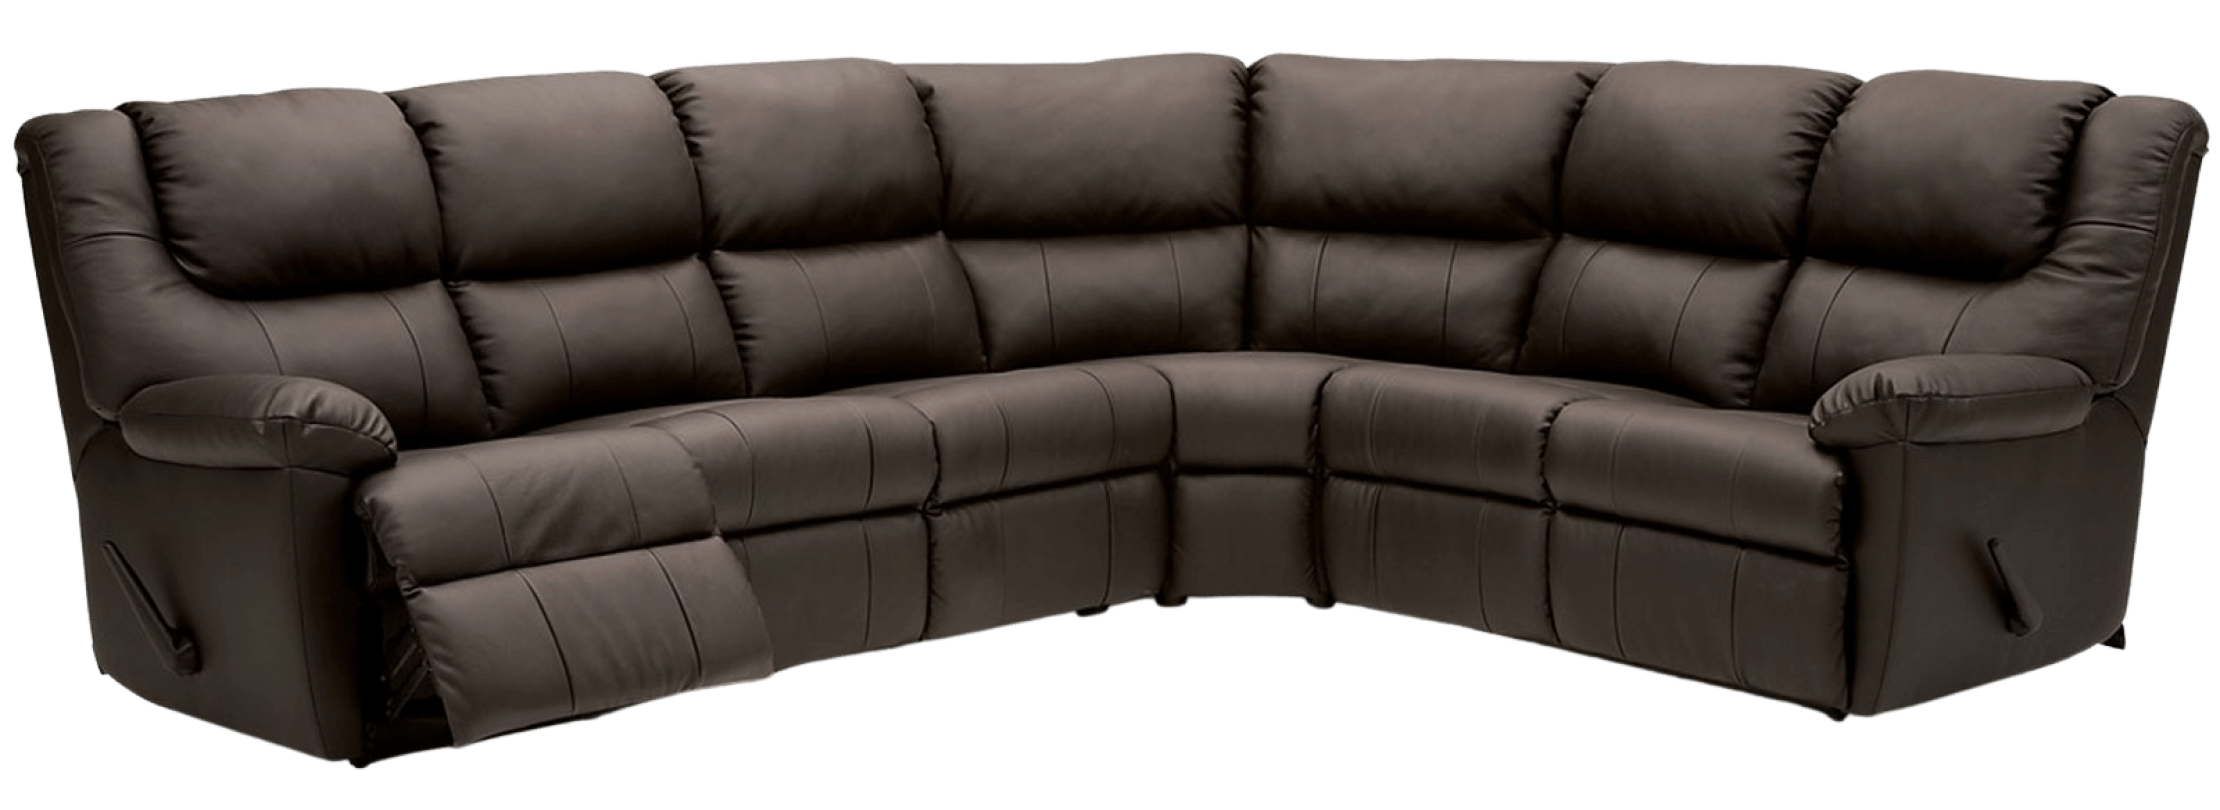 Curved sectional sofas